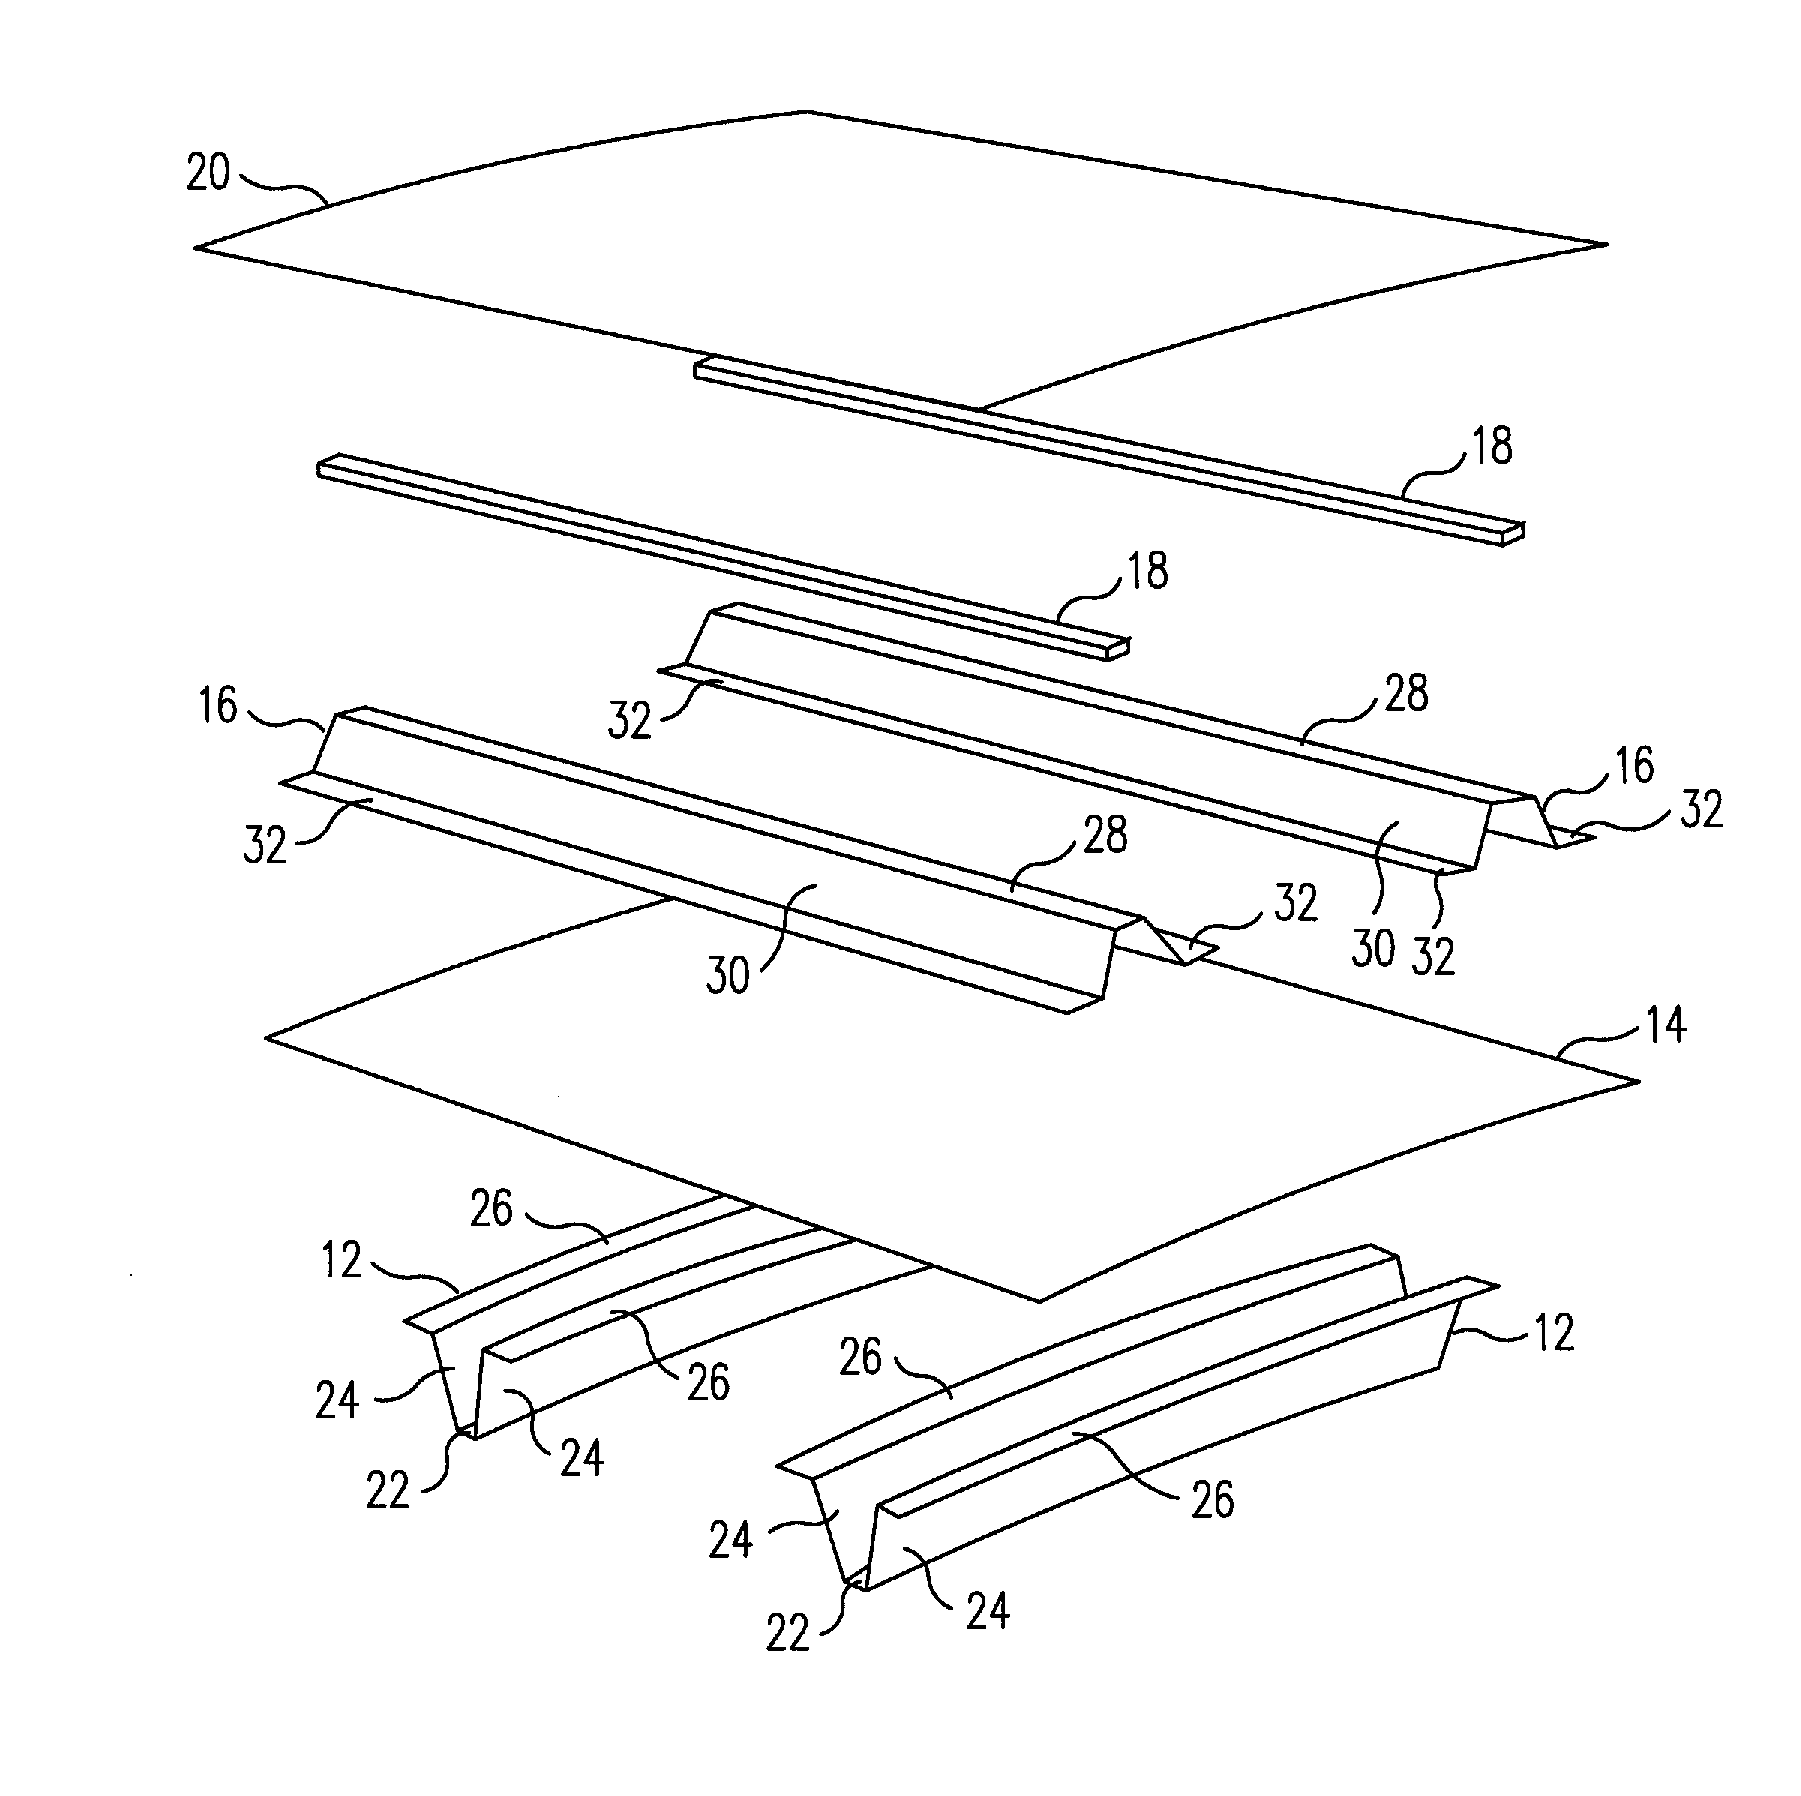 Composite Aircraft Structures With Hat Stiffeners